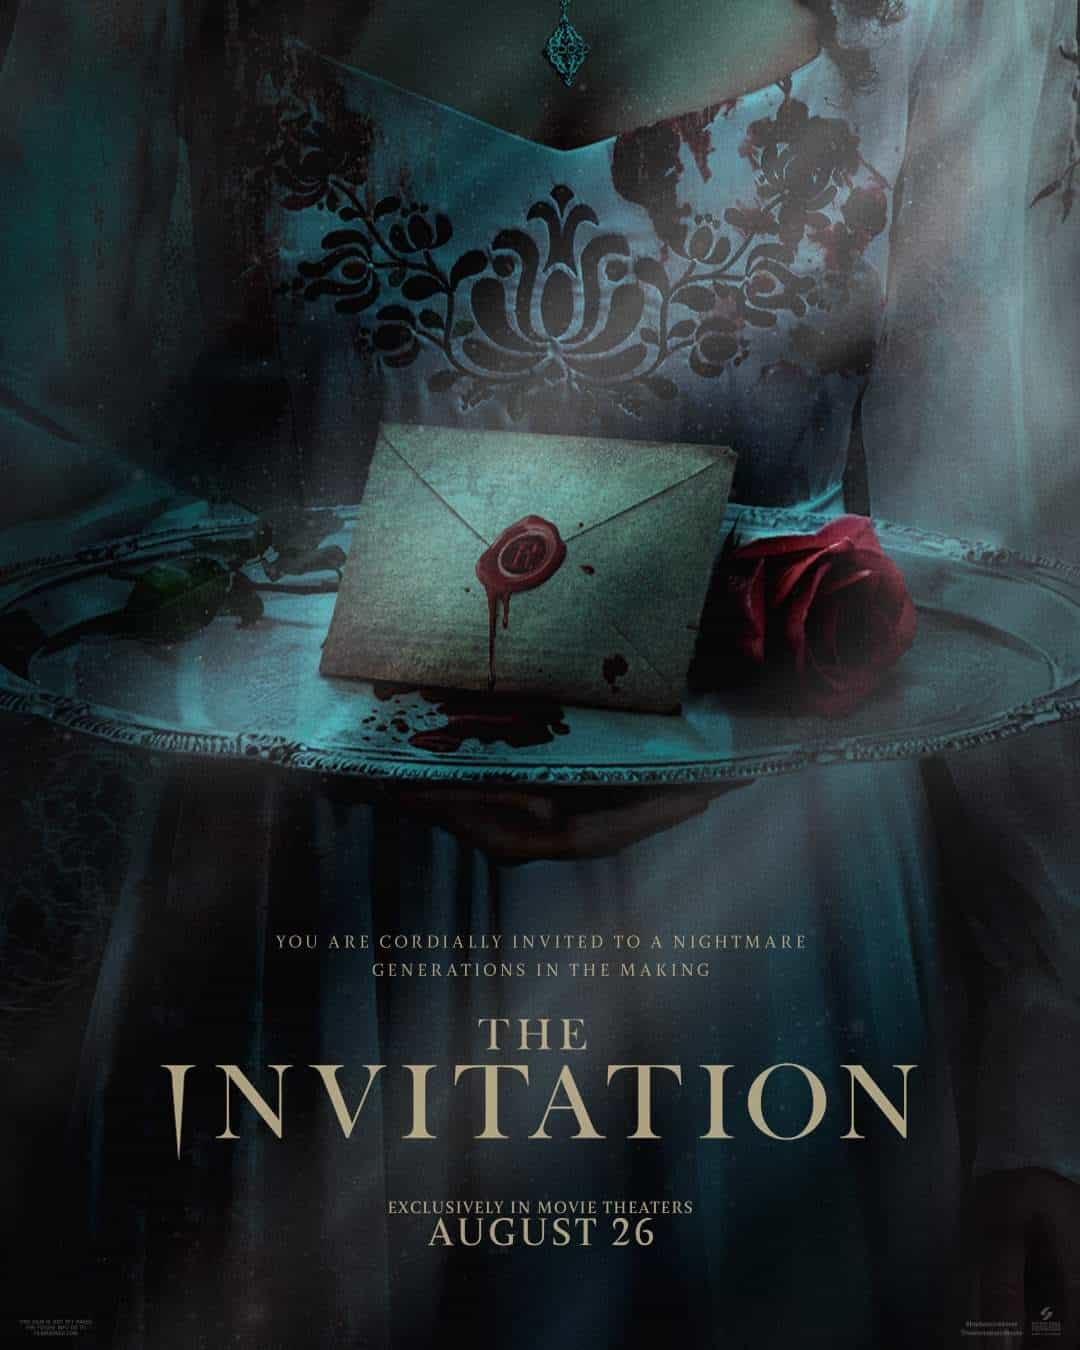 The Invitation is given a 15 age rating in the UK for strong horror, violence, bloody images